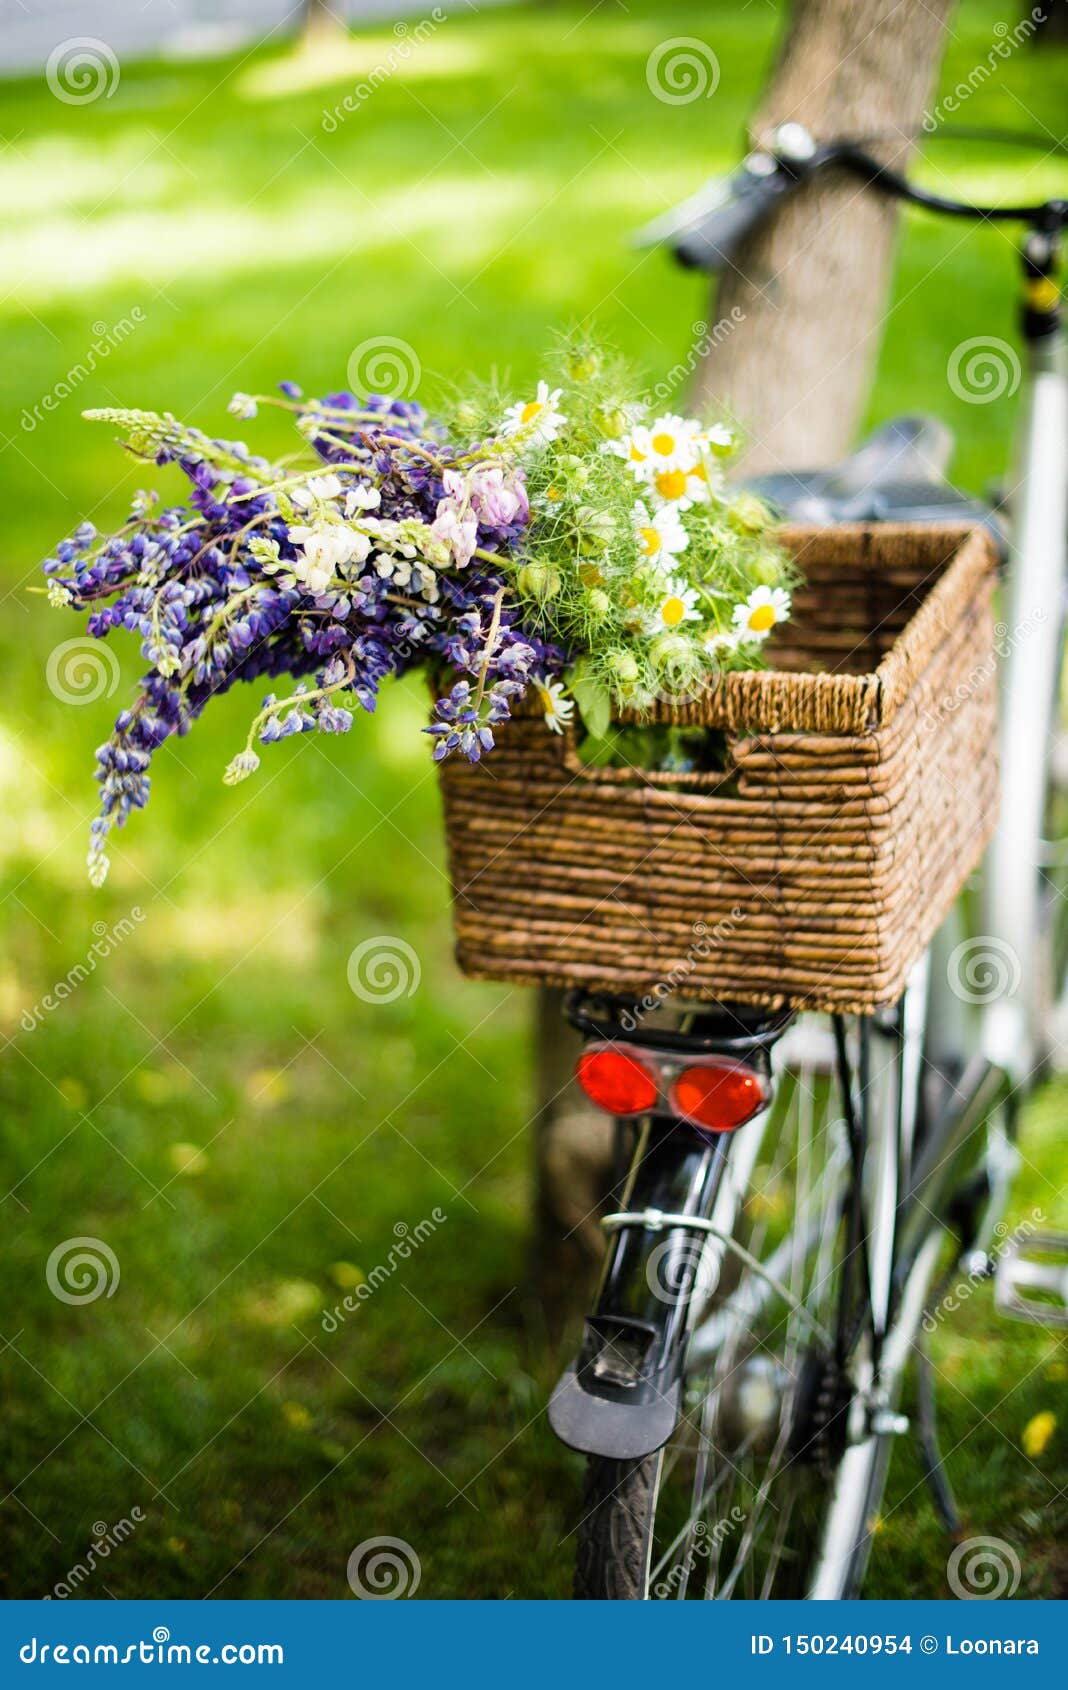 New City Bicycle With Bouquet Of Flowers In Wicker Basket ...